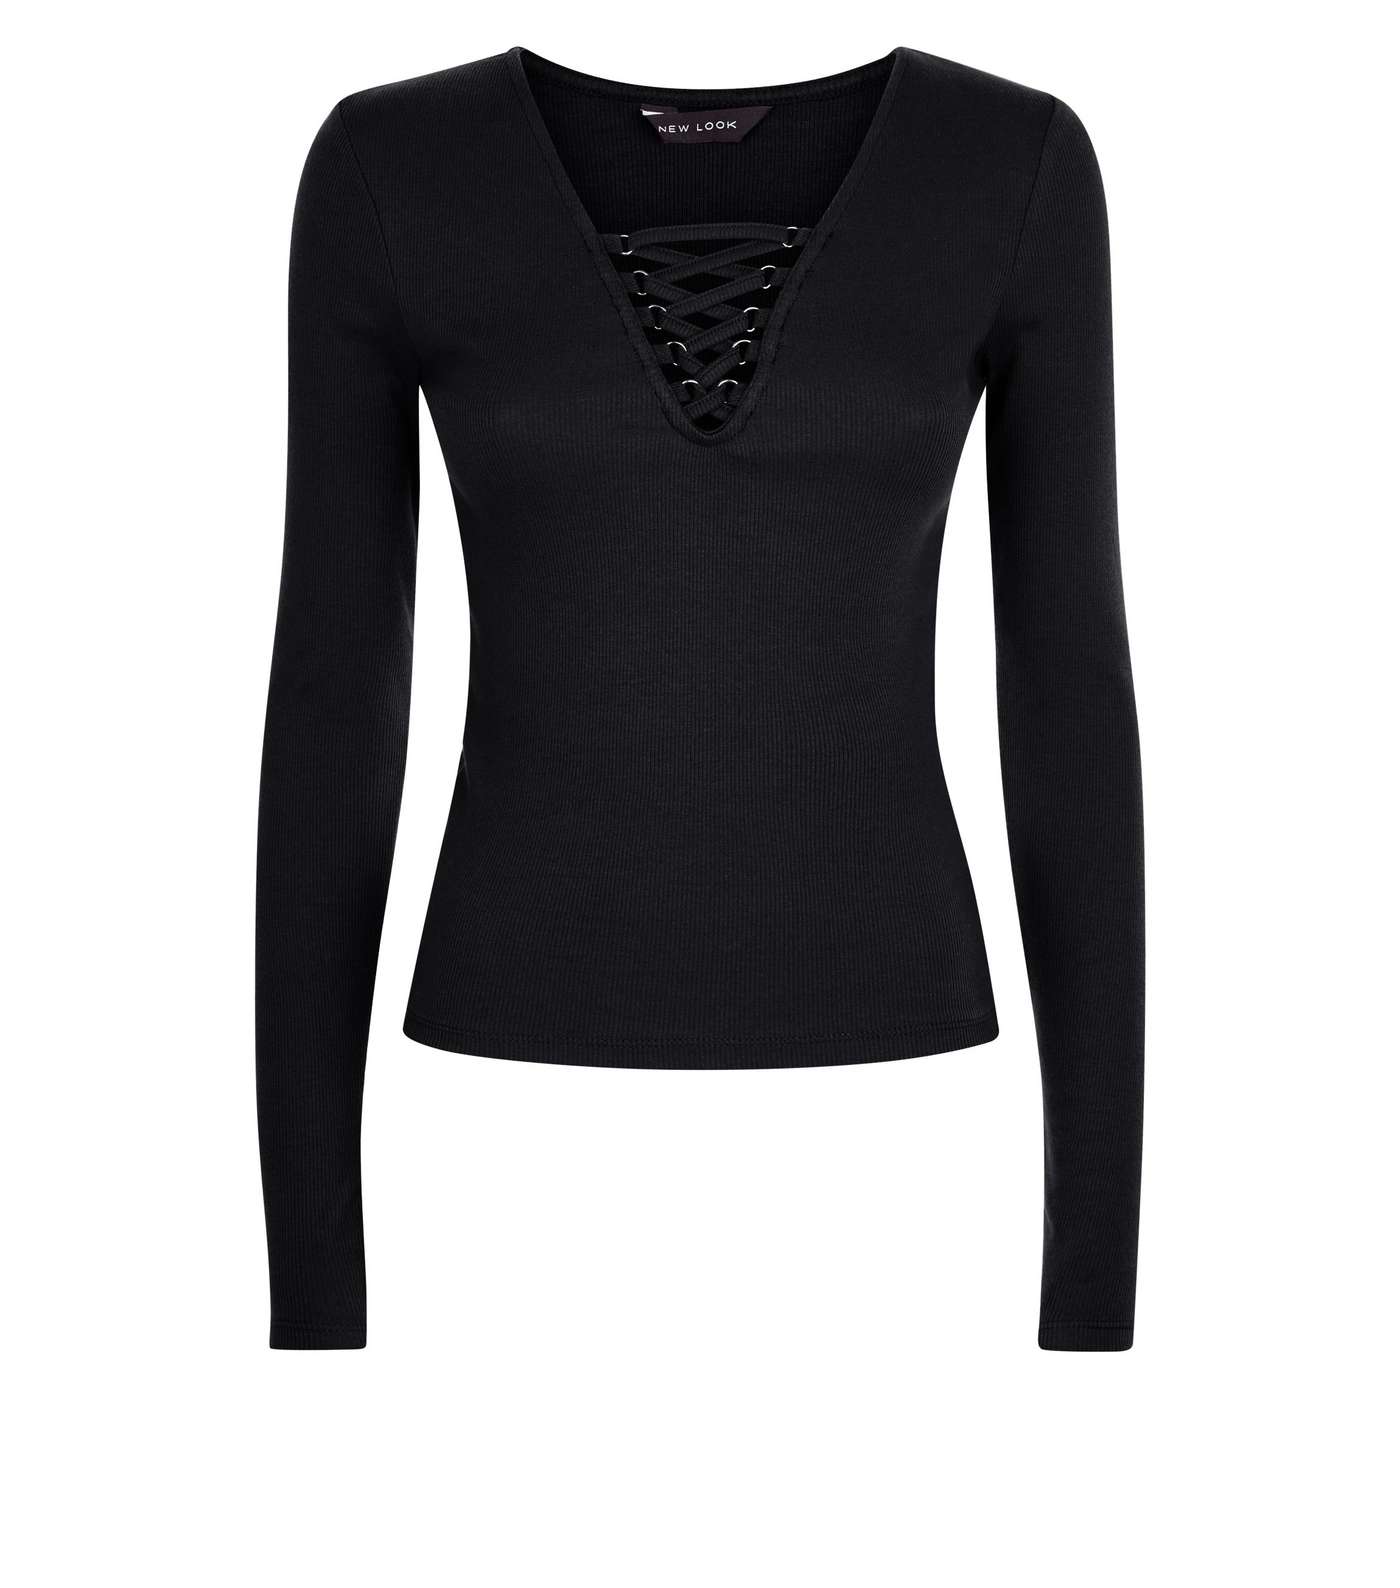 Black Lace-Up Neck Long Sleeve Top Image 4